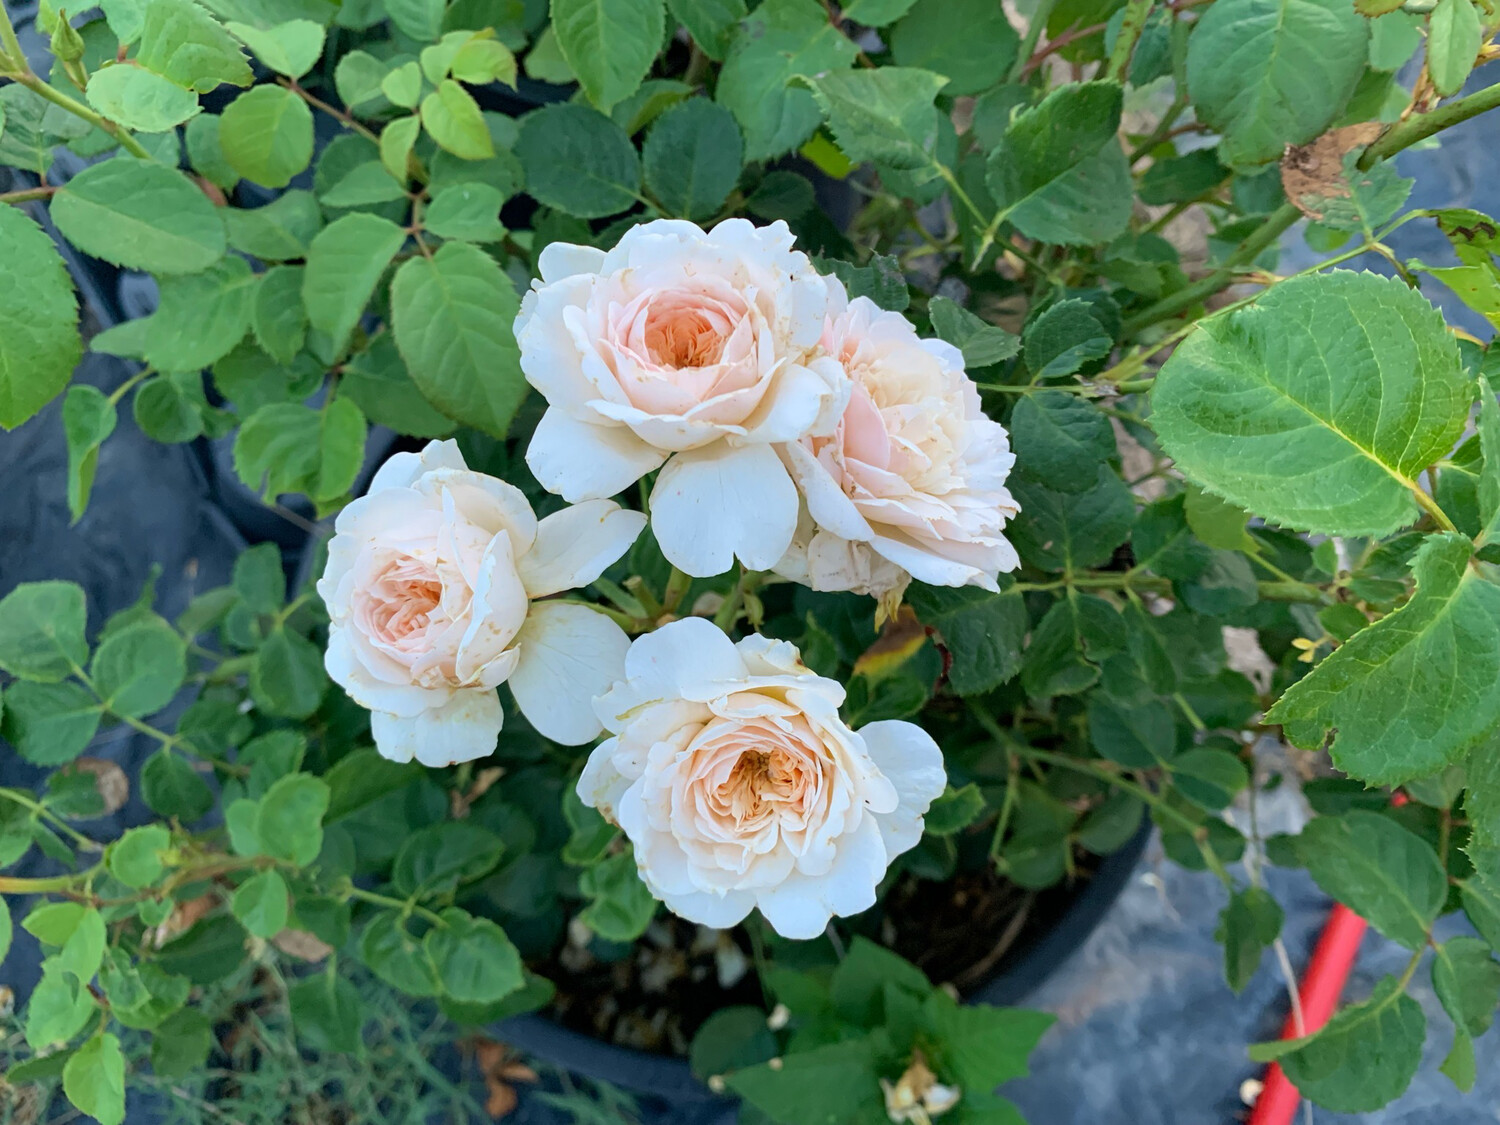 Bare Root Rose David Austin “Emily Bronte” 3 Gallon Size. Own Root!